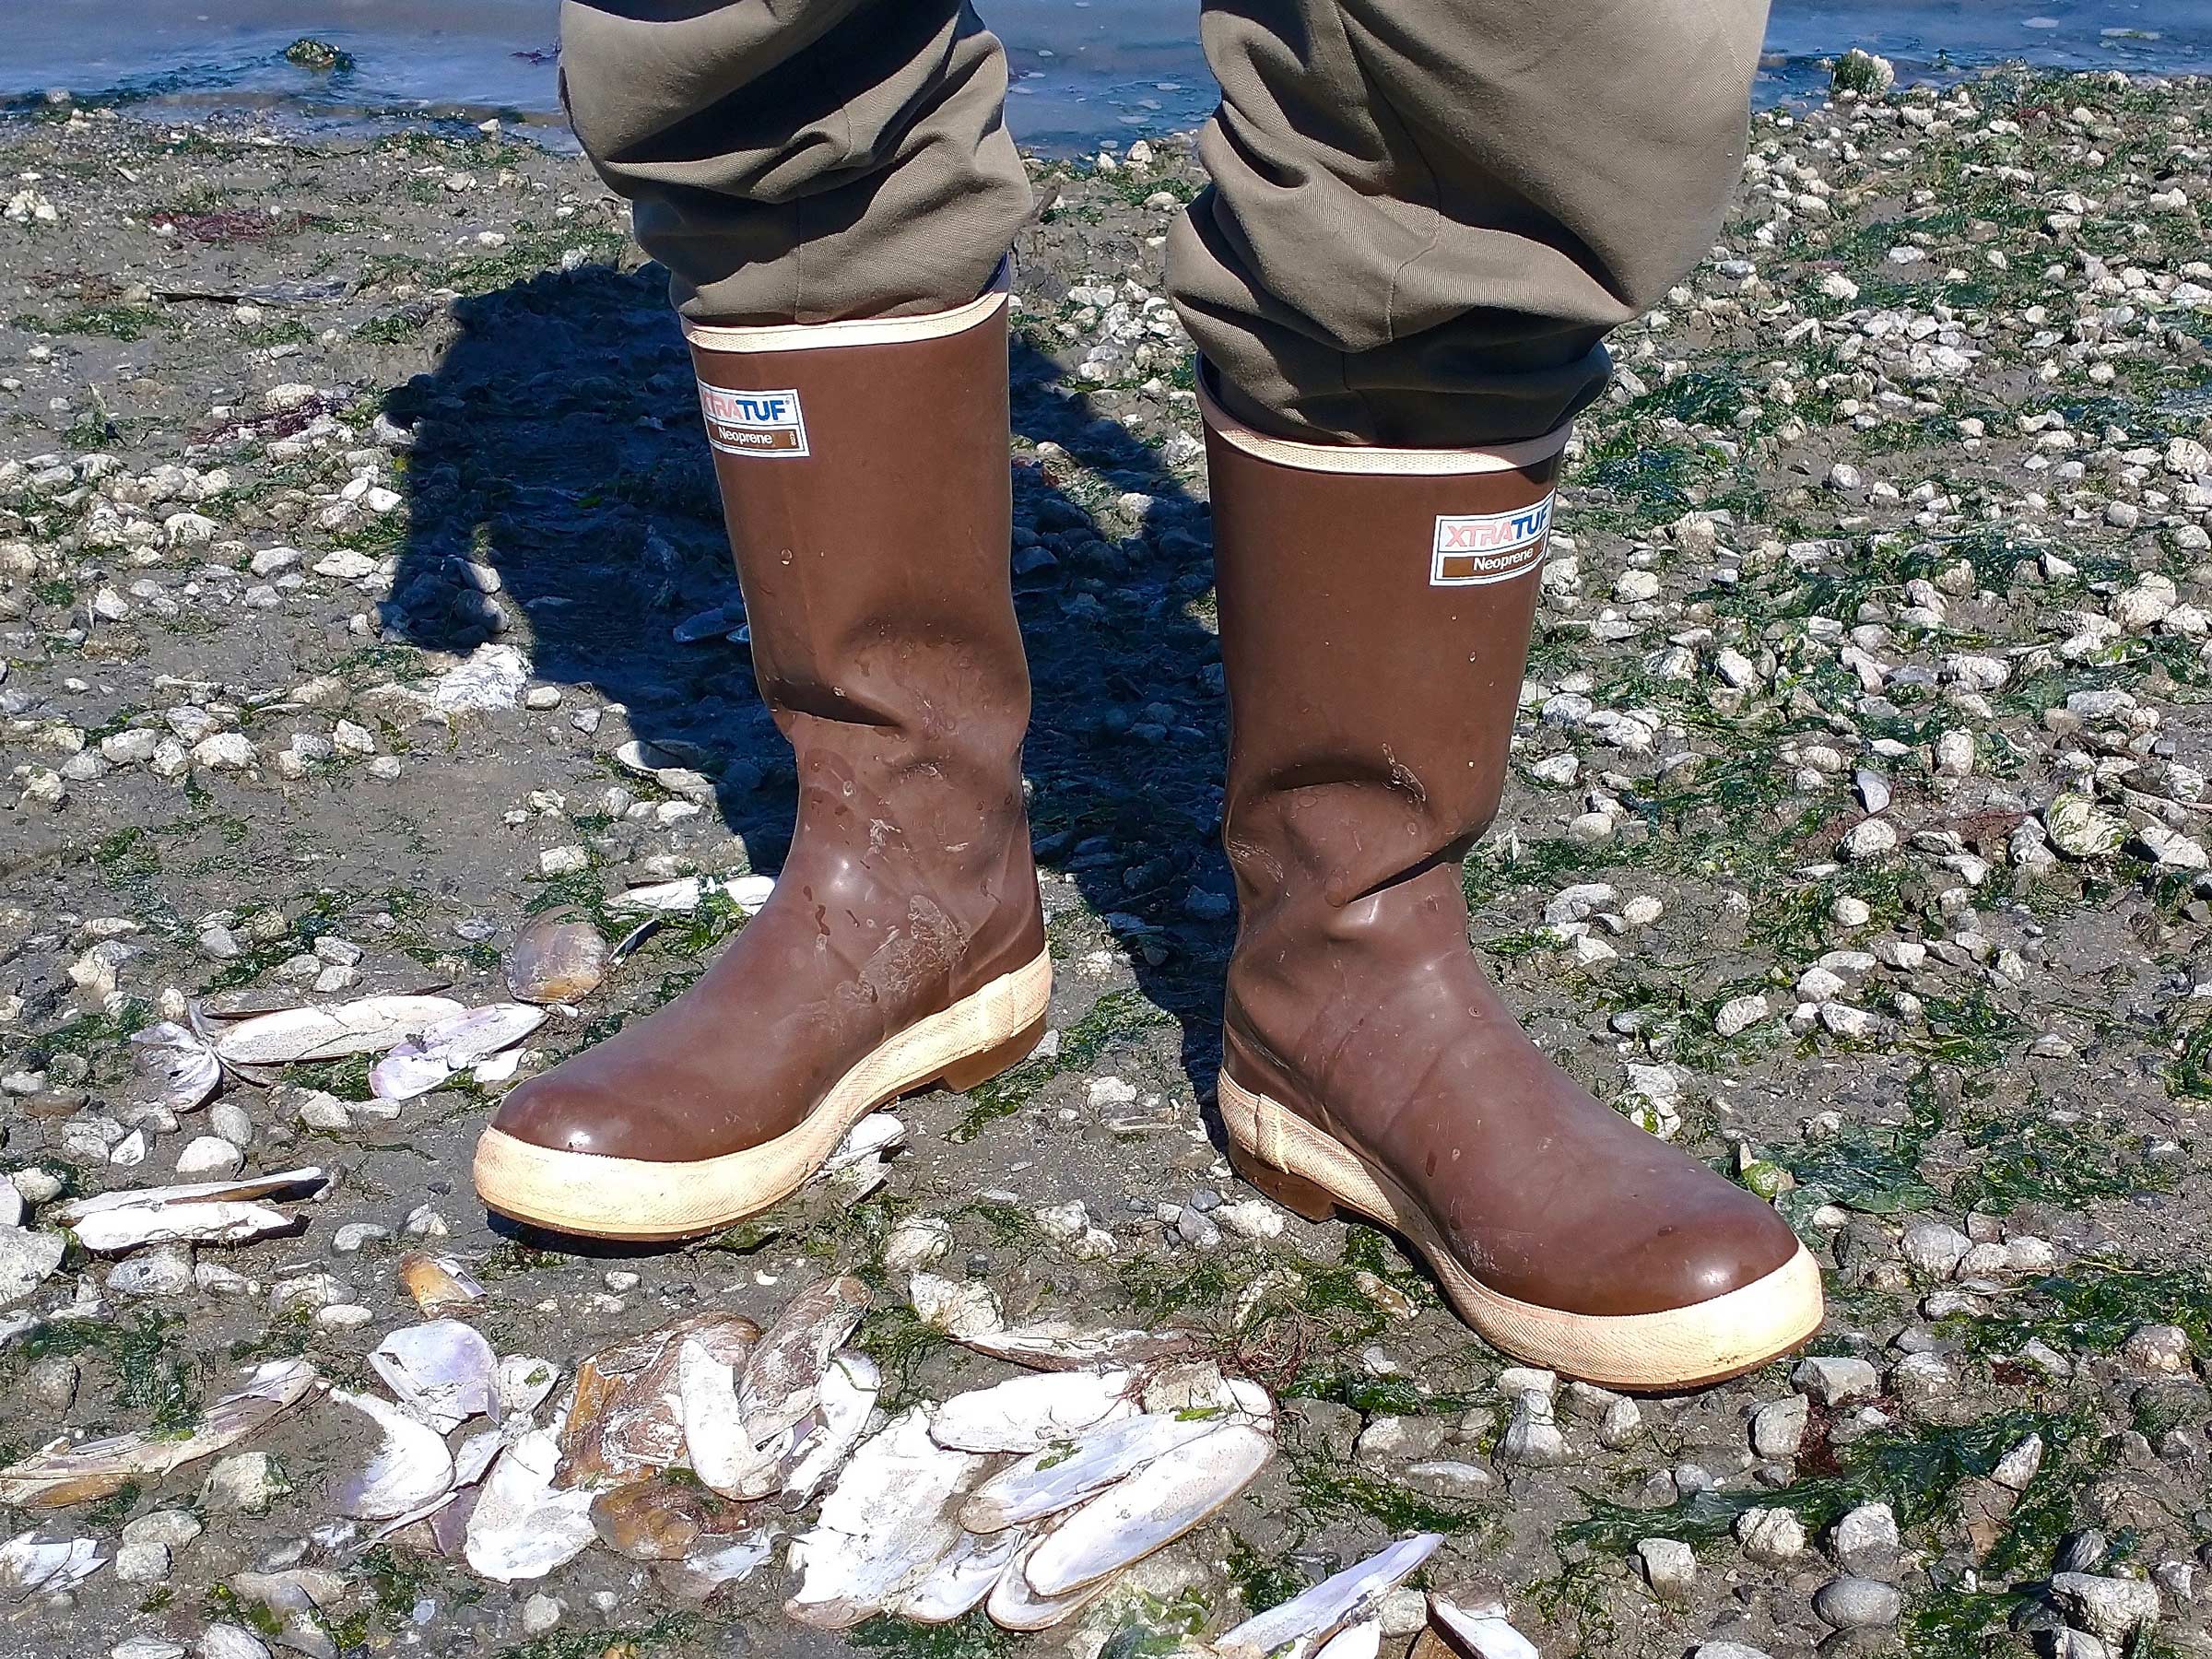 xtra tuff rubber boots  Fishing boots, Boots men, Boots